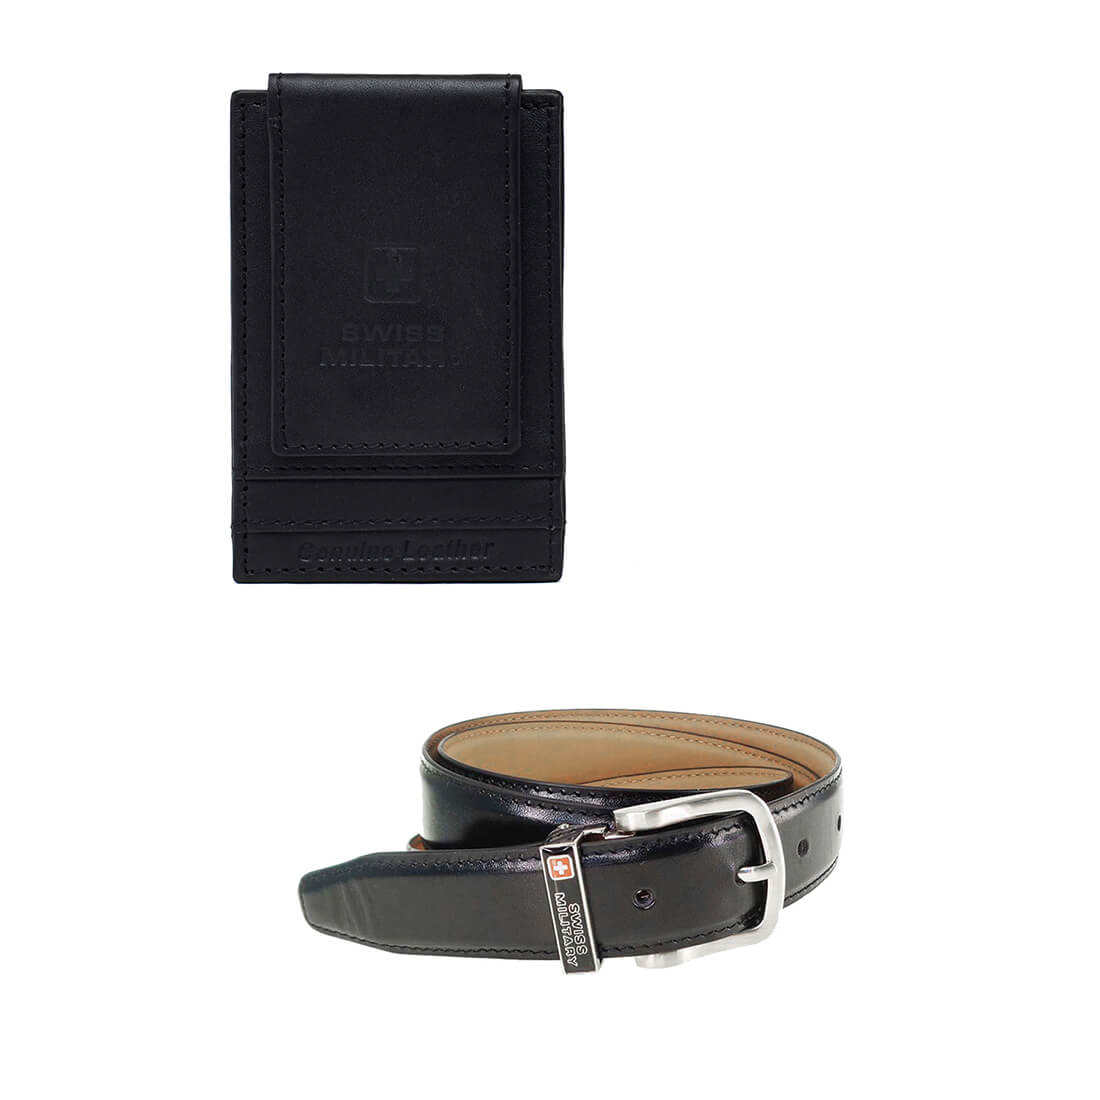 Gift Set of Leather Wallets & Leather Belts Combo Pack (LW34+BLT12)